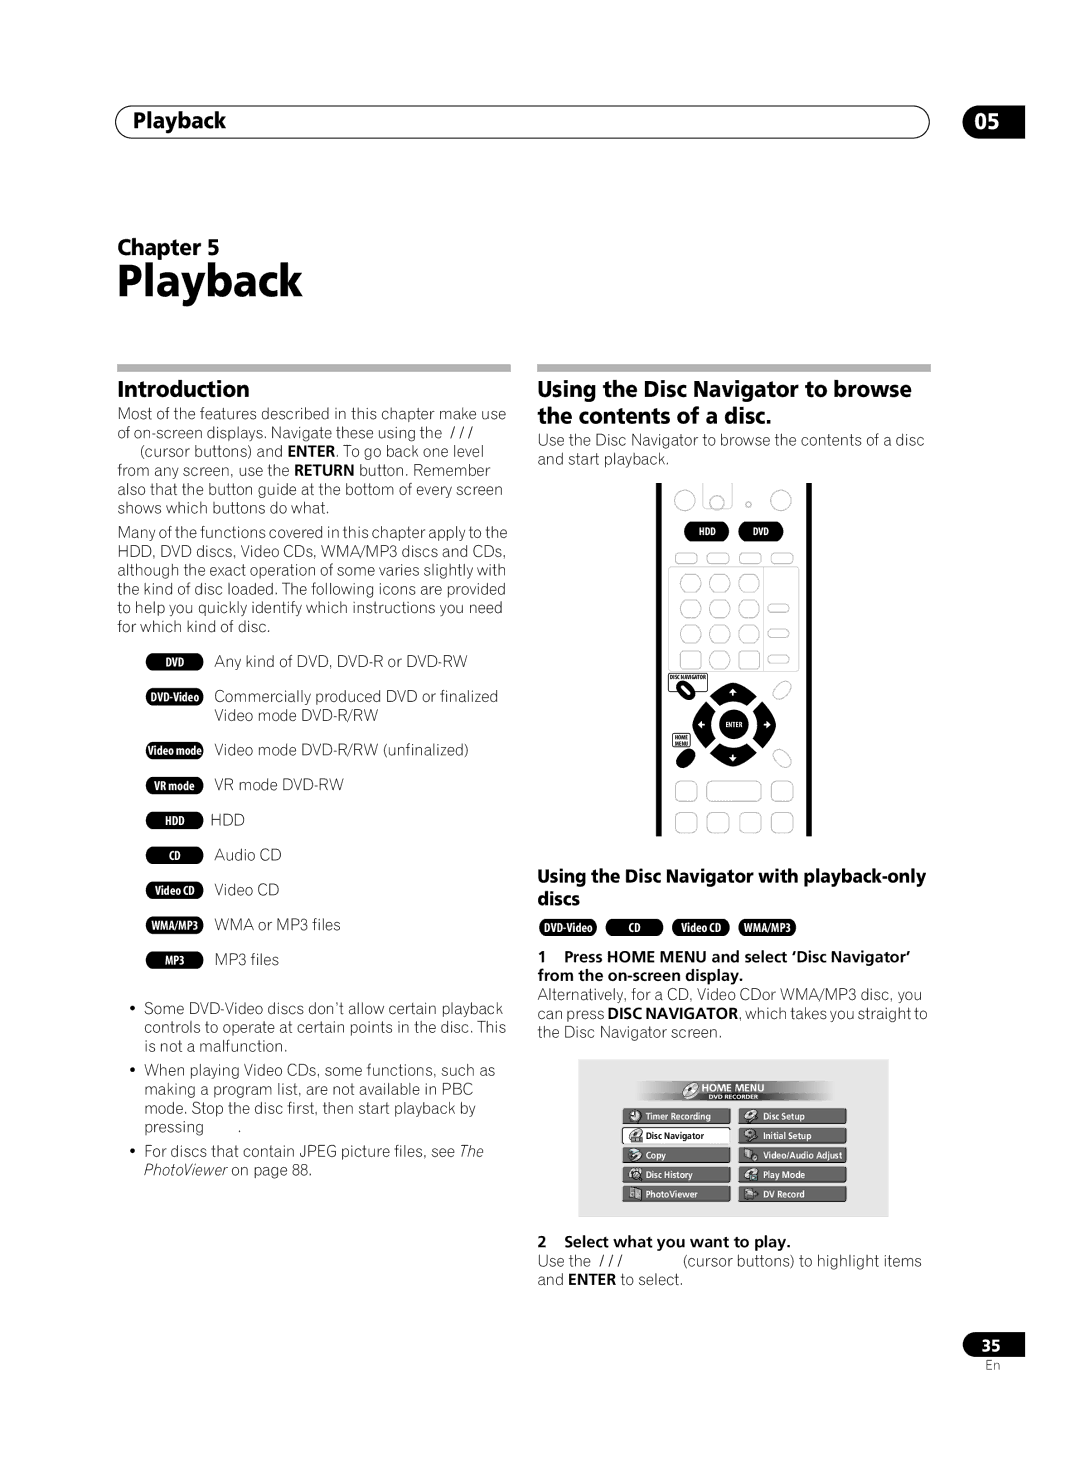 Pioneer PRV-9200 Playback Chapter, Introduction, Using the Disc Navigator to browse the contents of a disc 